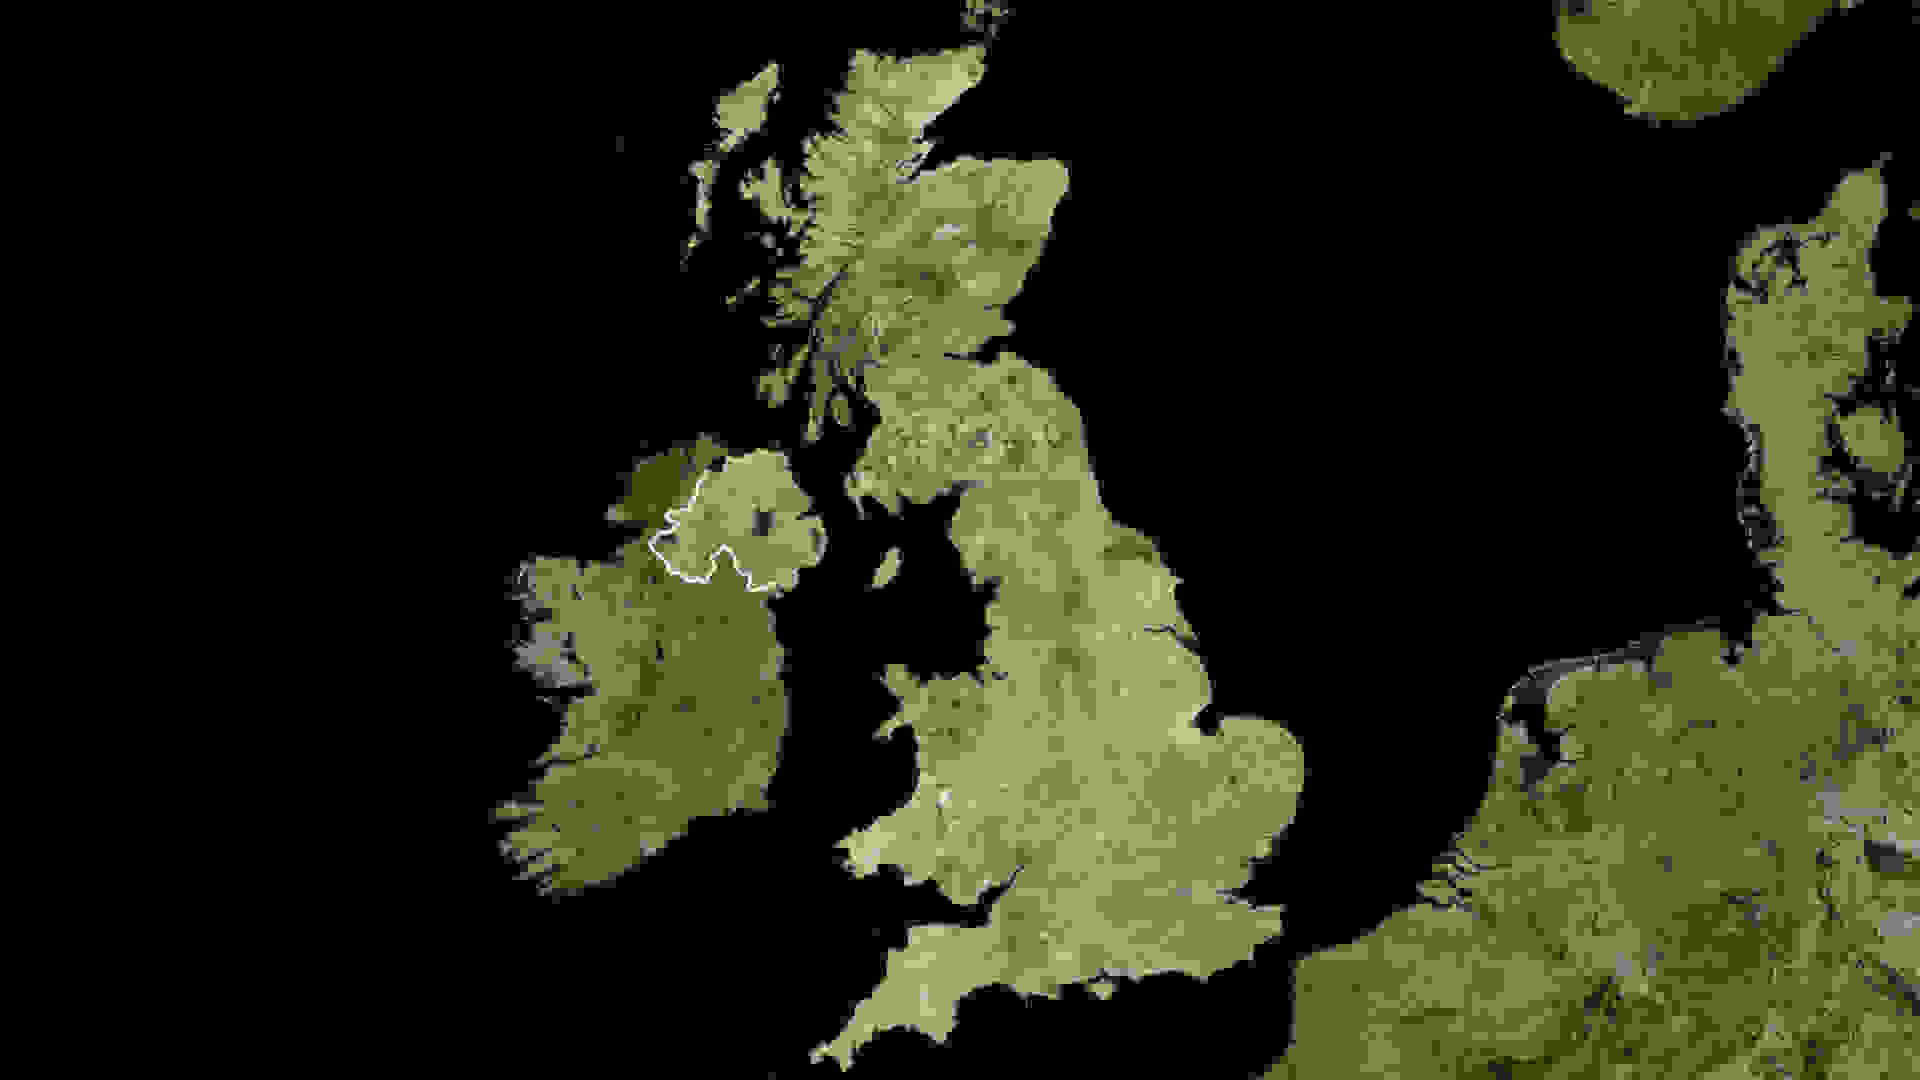 Satellite image of the United Kingdom with borders